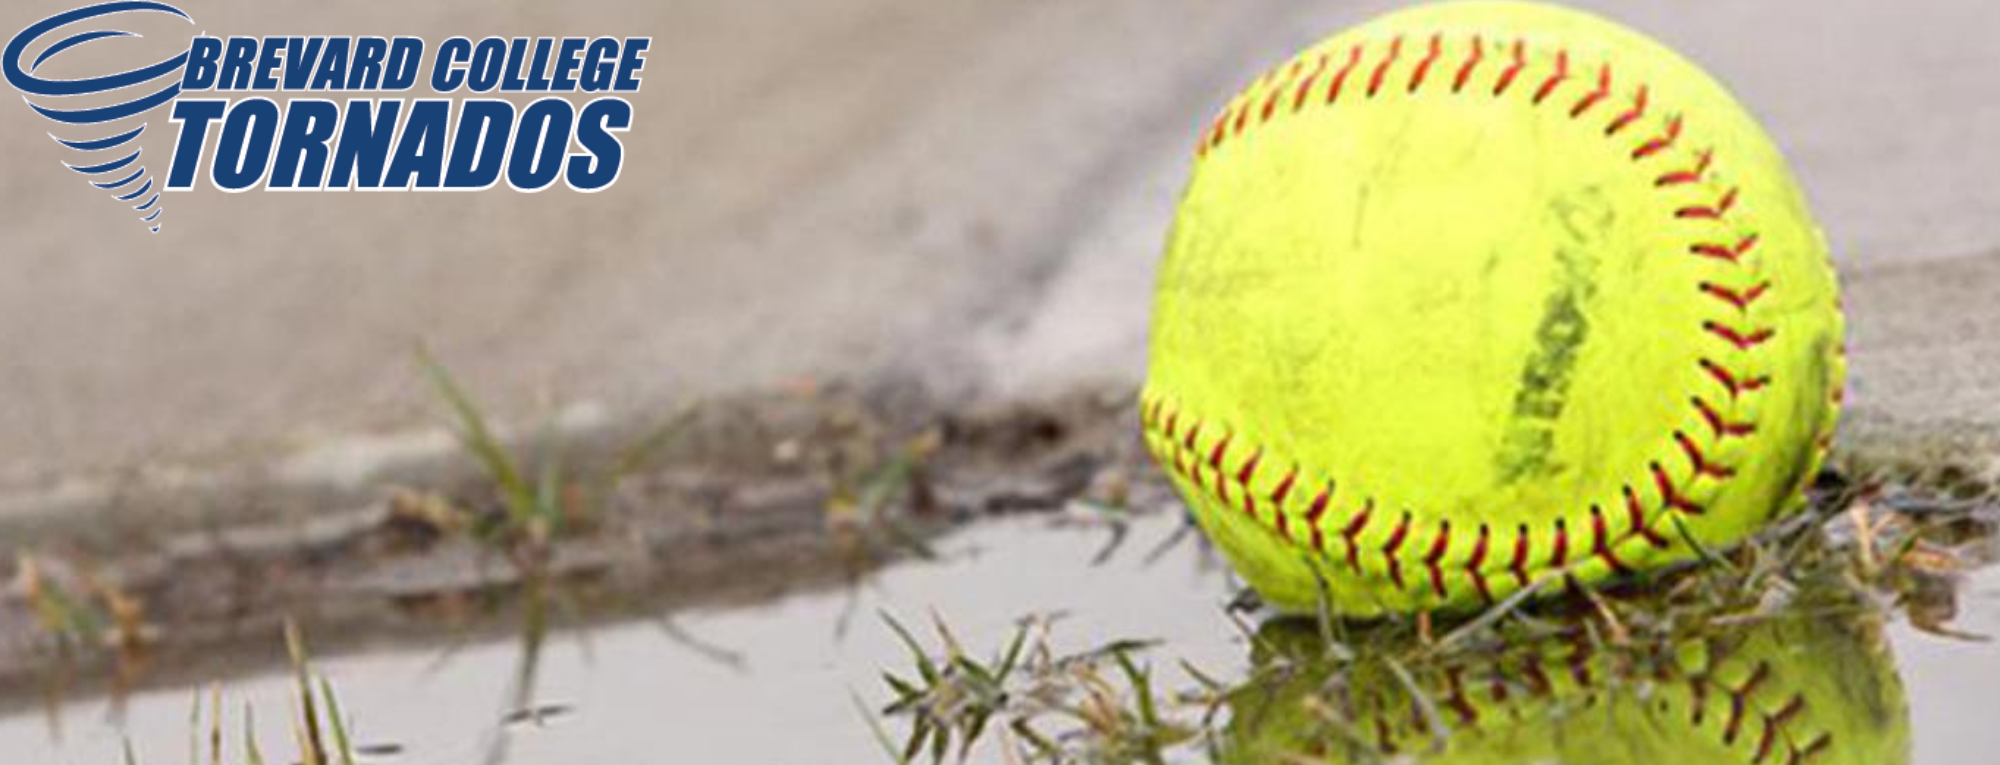 Home Softball Doubleheader vs N.C. Wesleyan Moved to Friday, March 1 at 2 & 4 p.m.